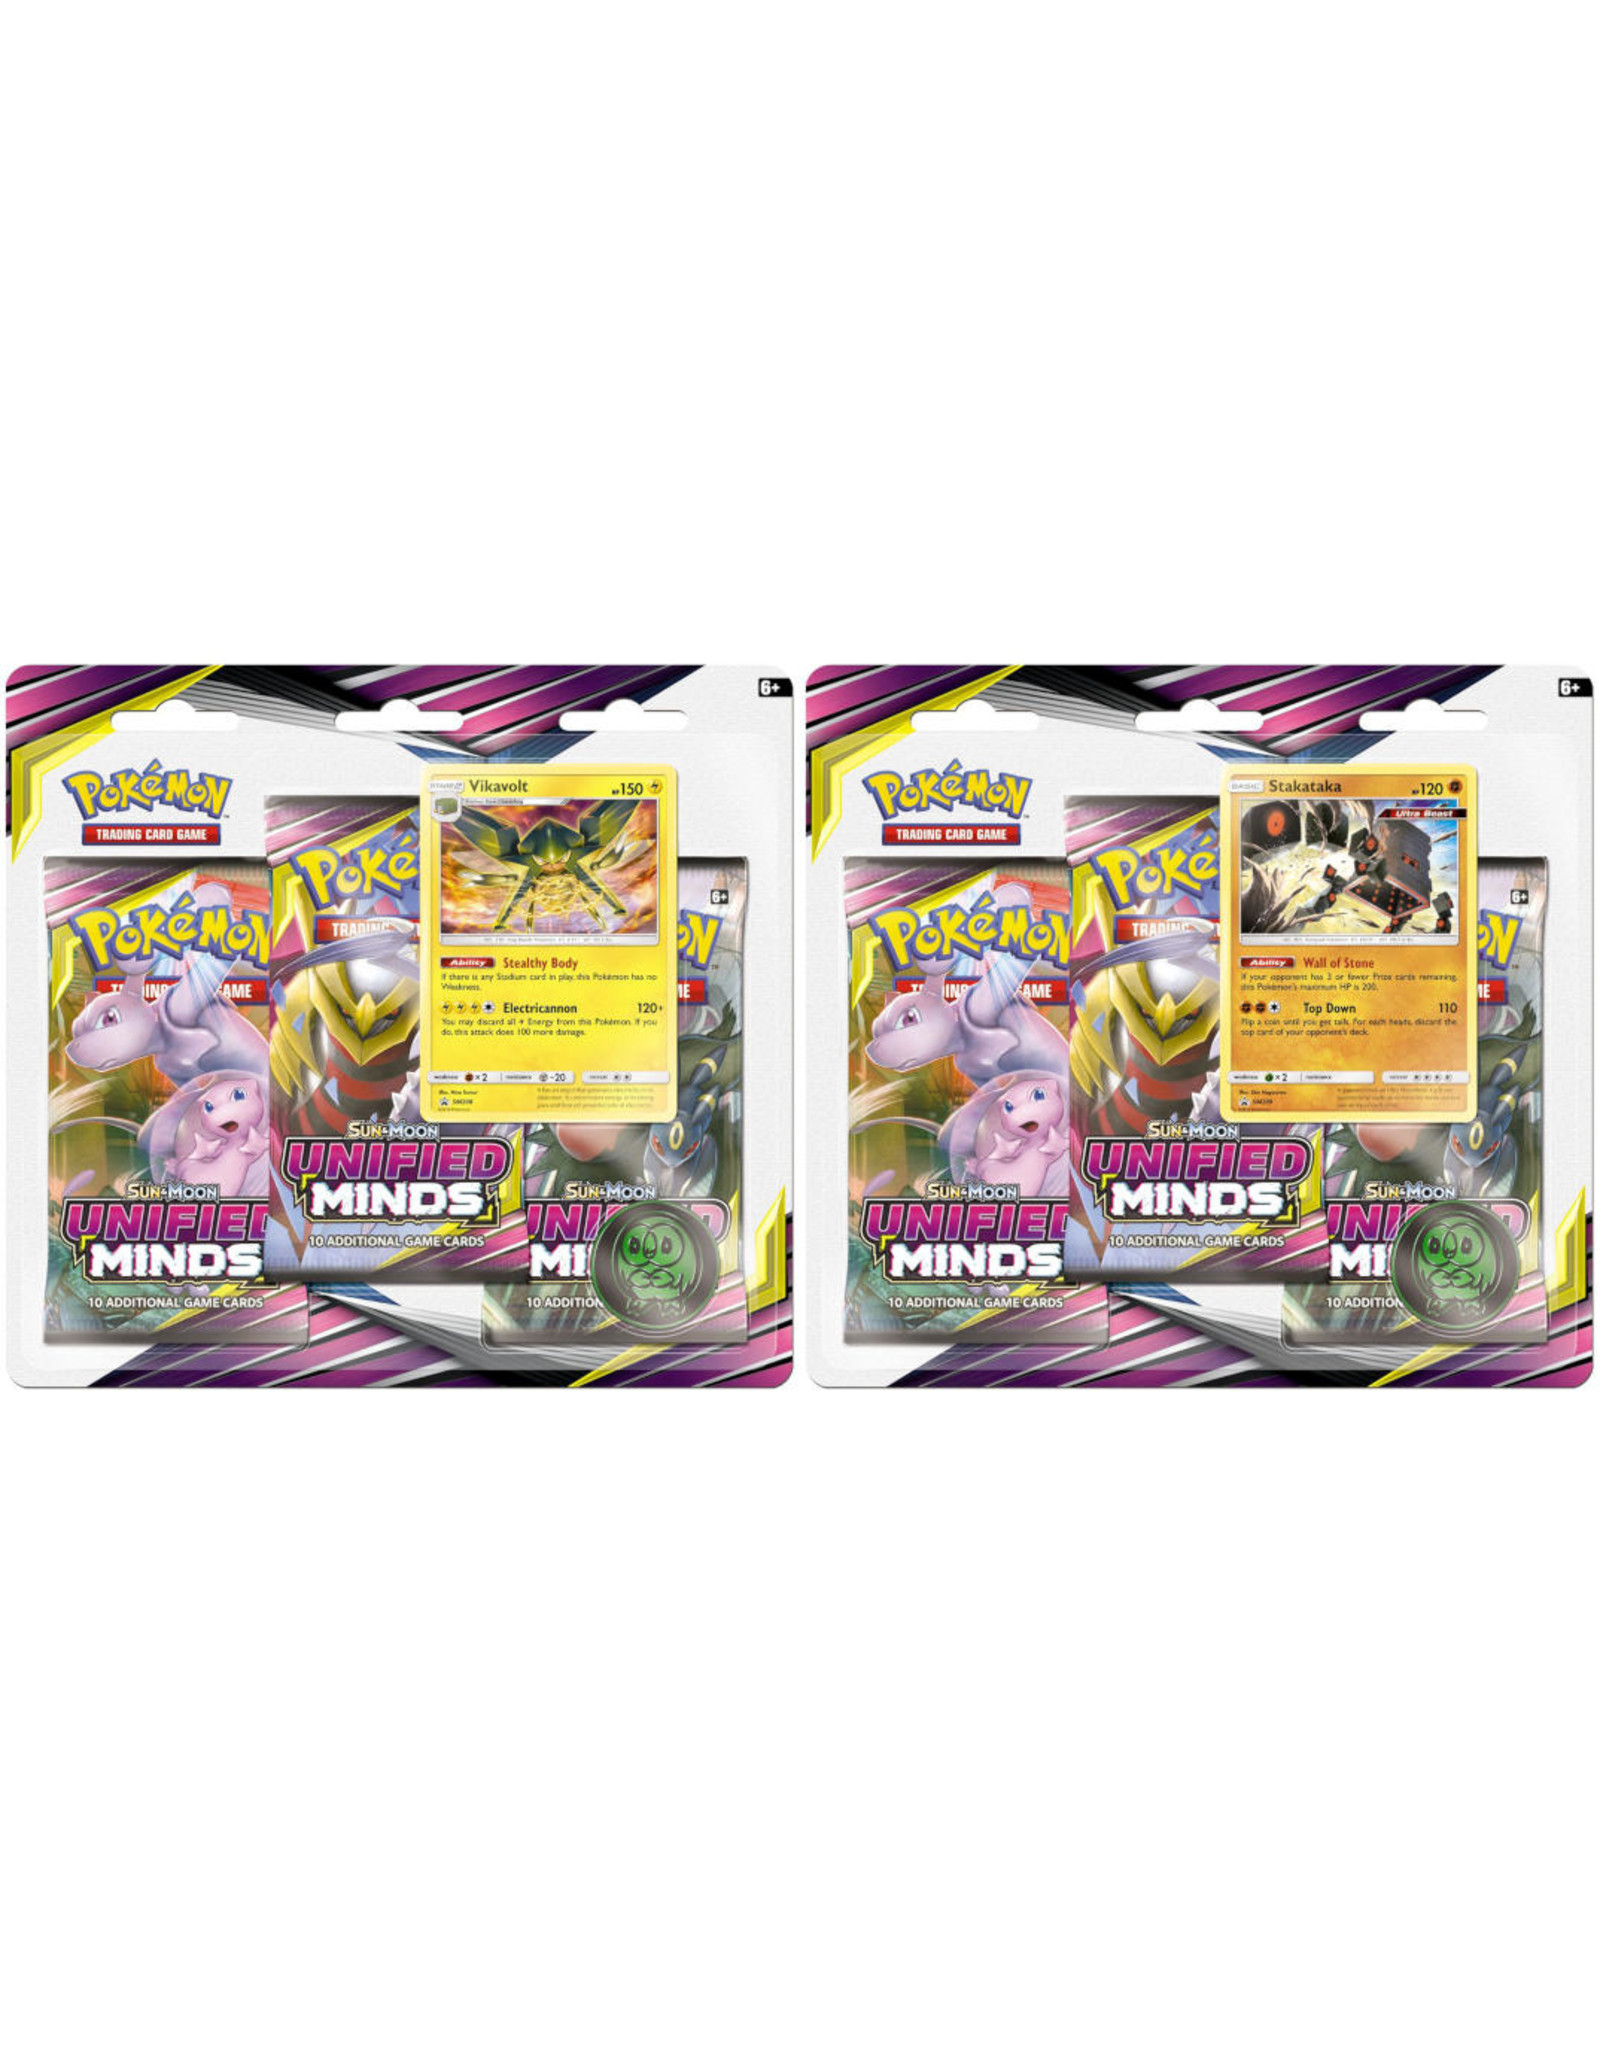 Unified Minds 3 pack blister